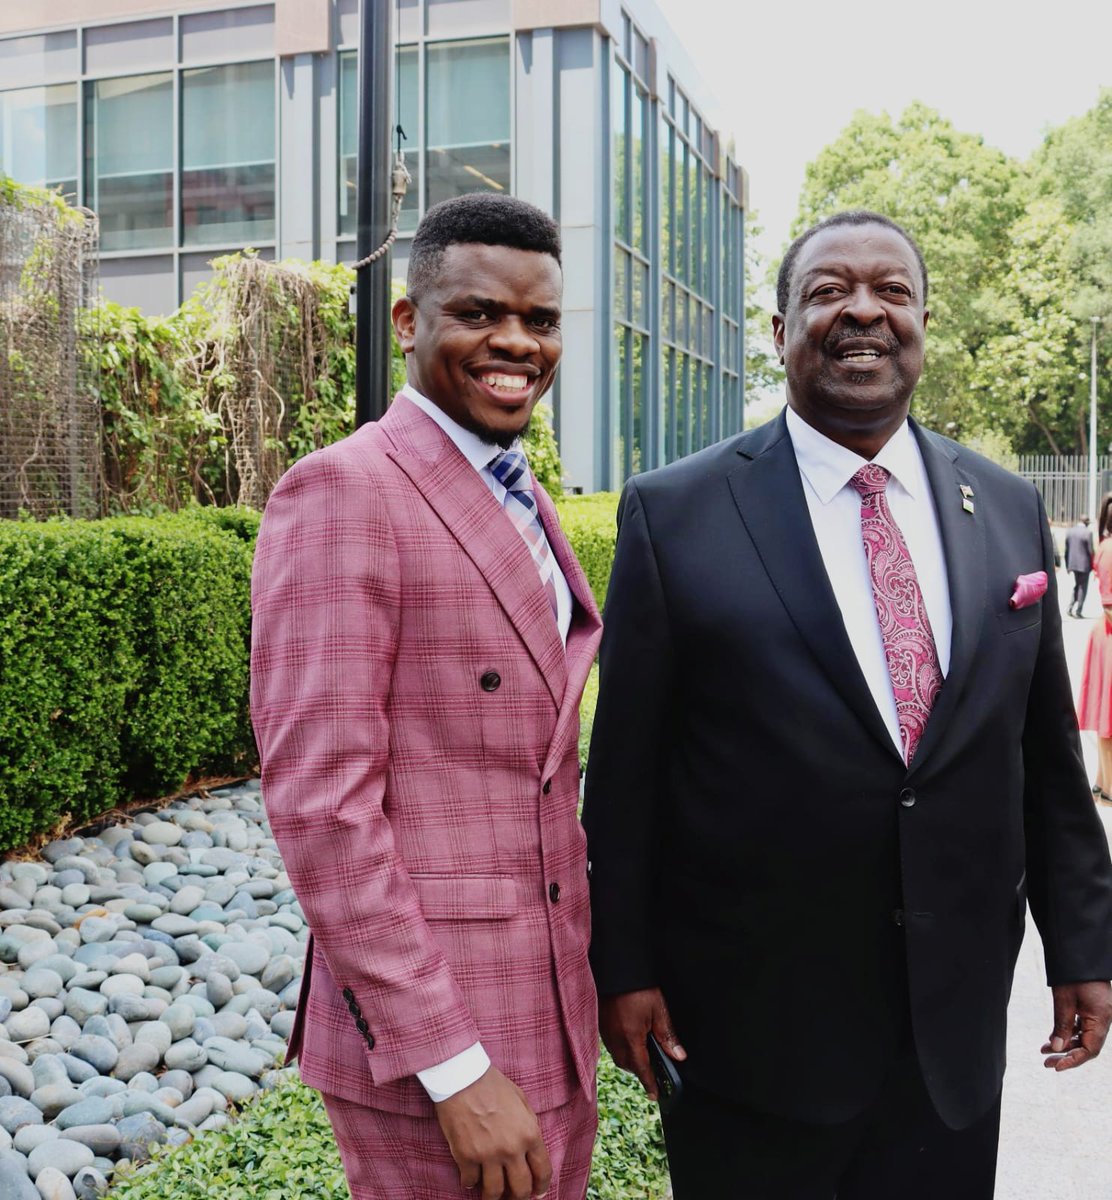 I'm glad to have met, interacted with, and tapped into the wisdom of Kenya's best Cabinet Secretary for Foreign Affairs and Diaspora, who also doubles as the Prime CS, Dr. Musalia Mudavadi! Such a calm, composed, and respectful man! We should vote for him in 2032.